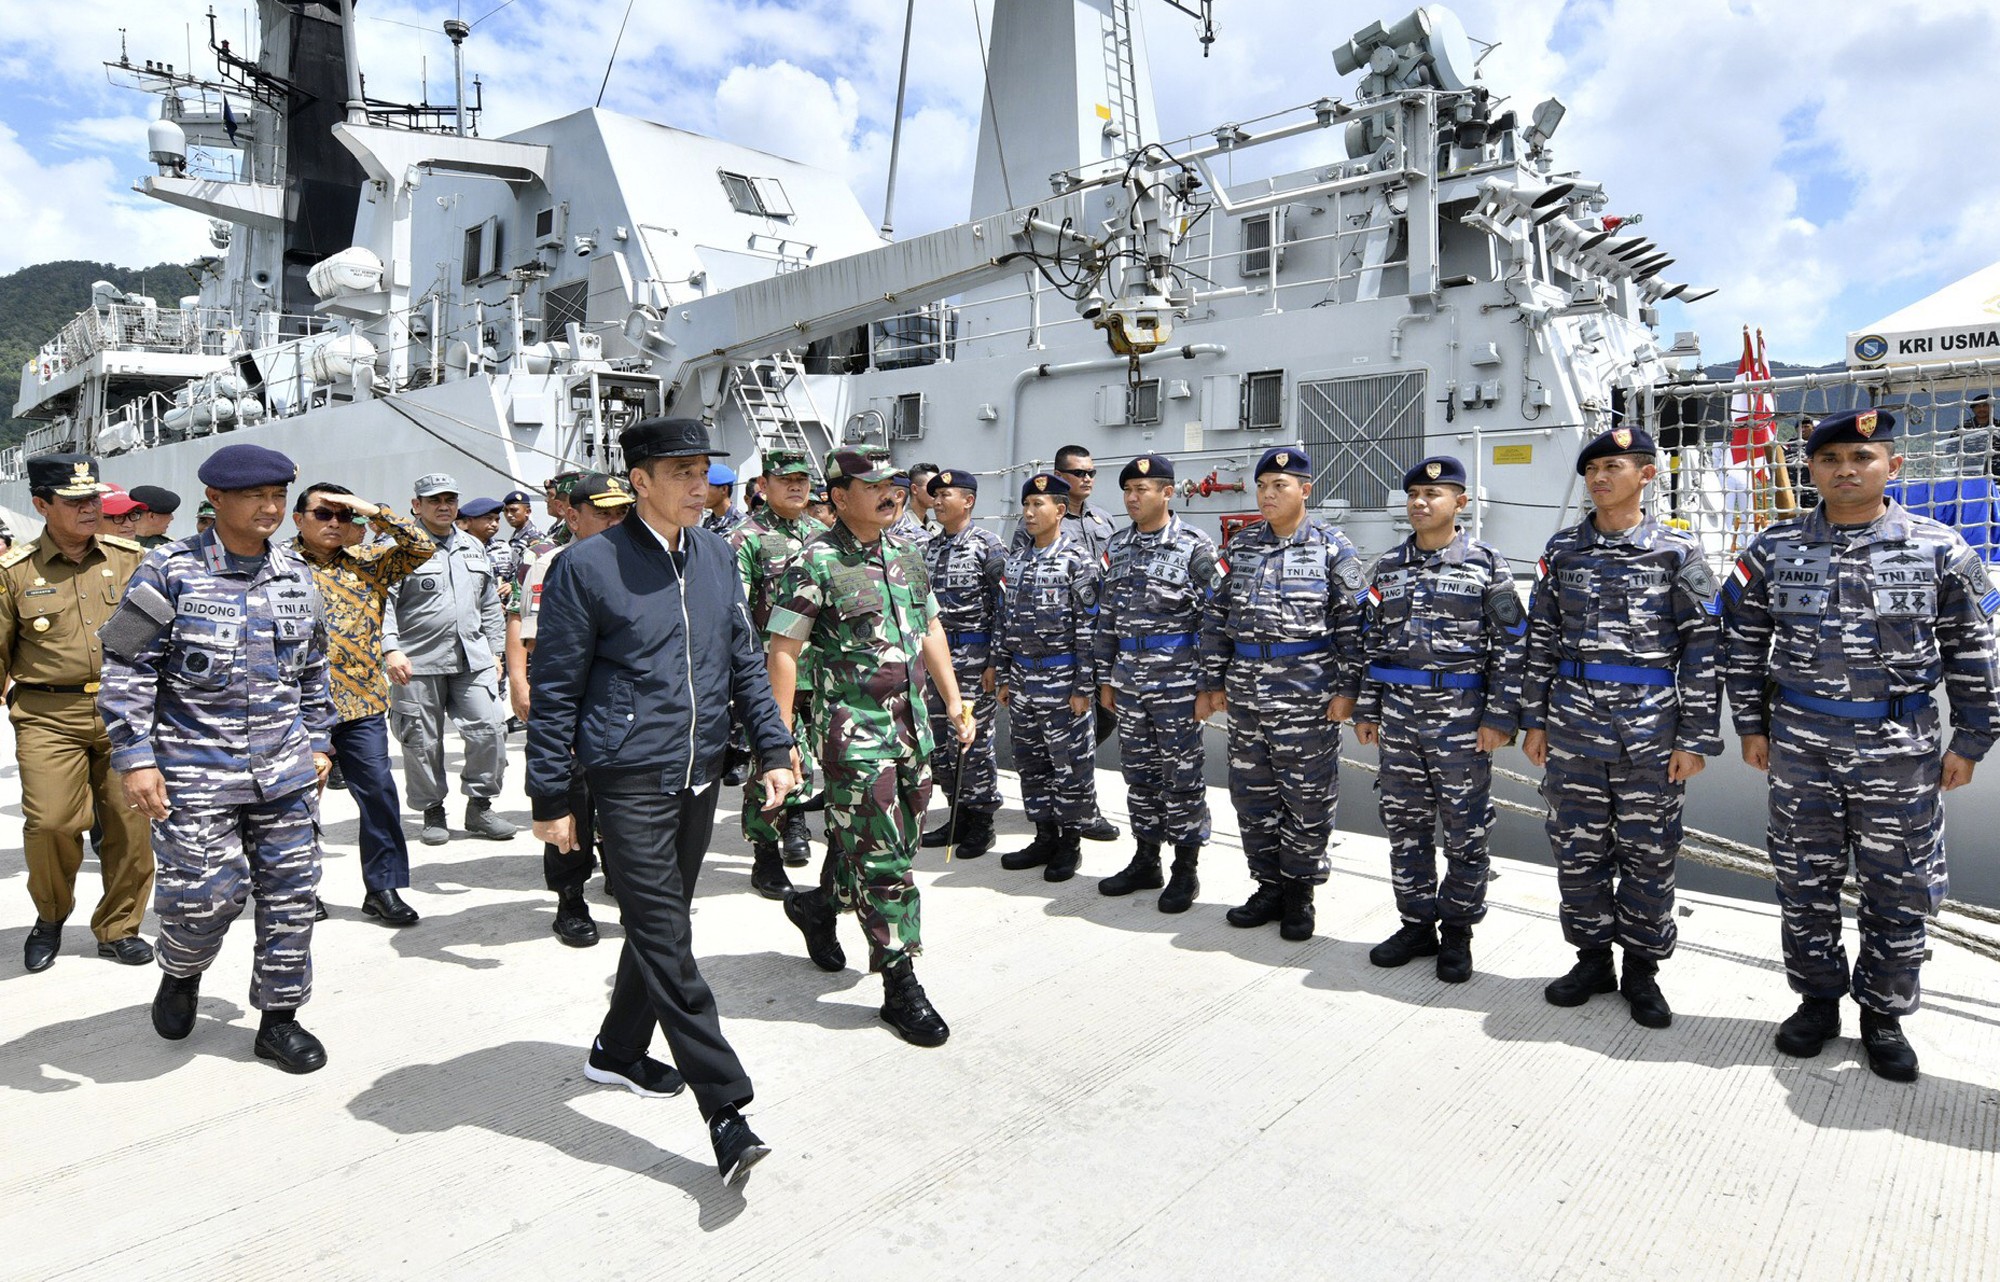 Indonesian President Joko Widodo inspects troops during his visit to the Natuna Islands on January 8. Photo: AP